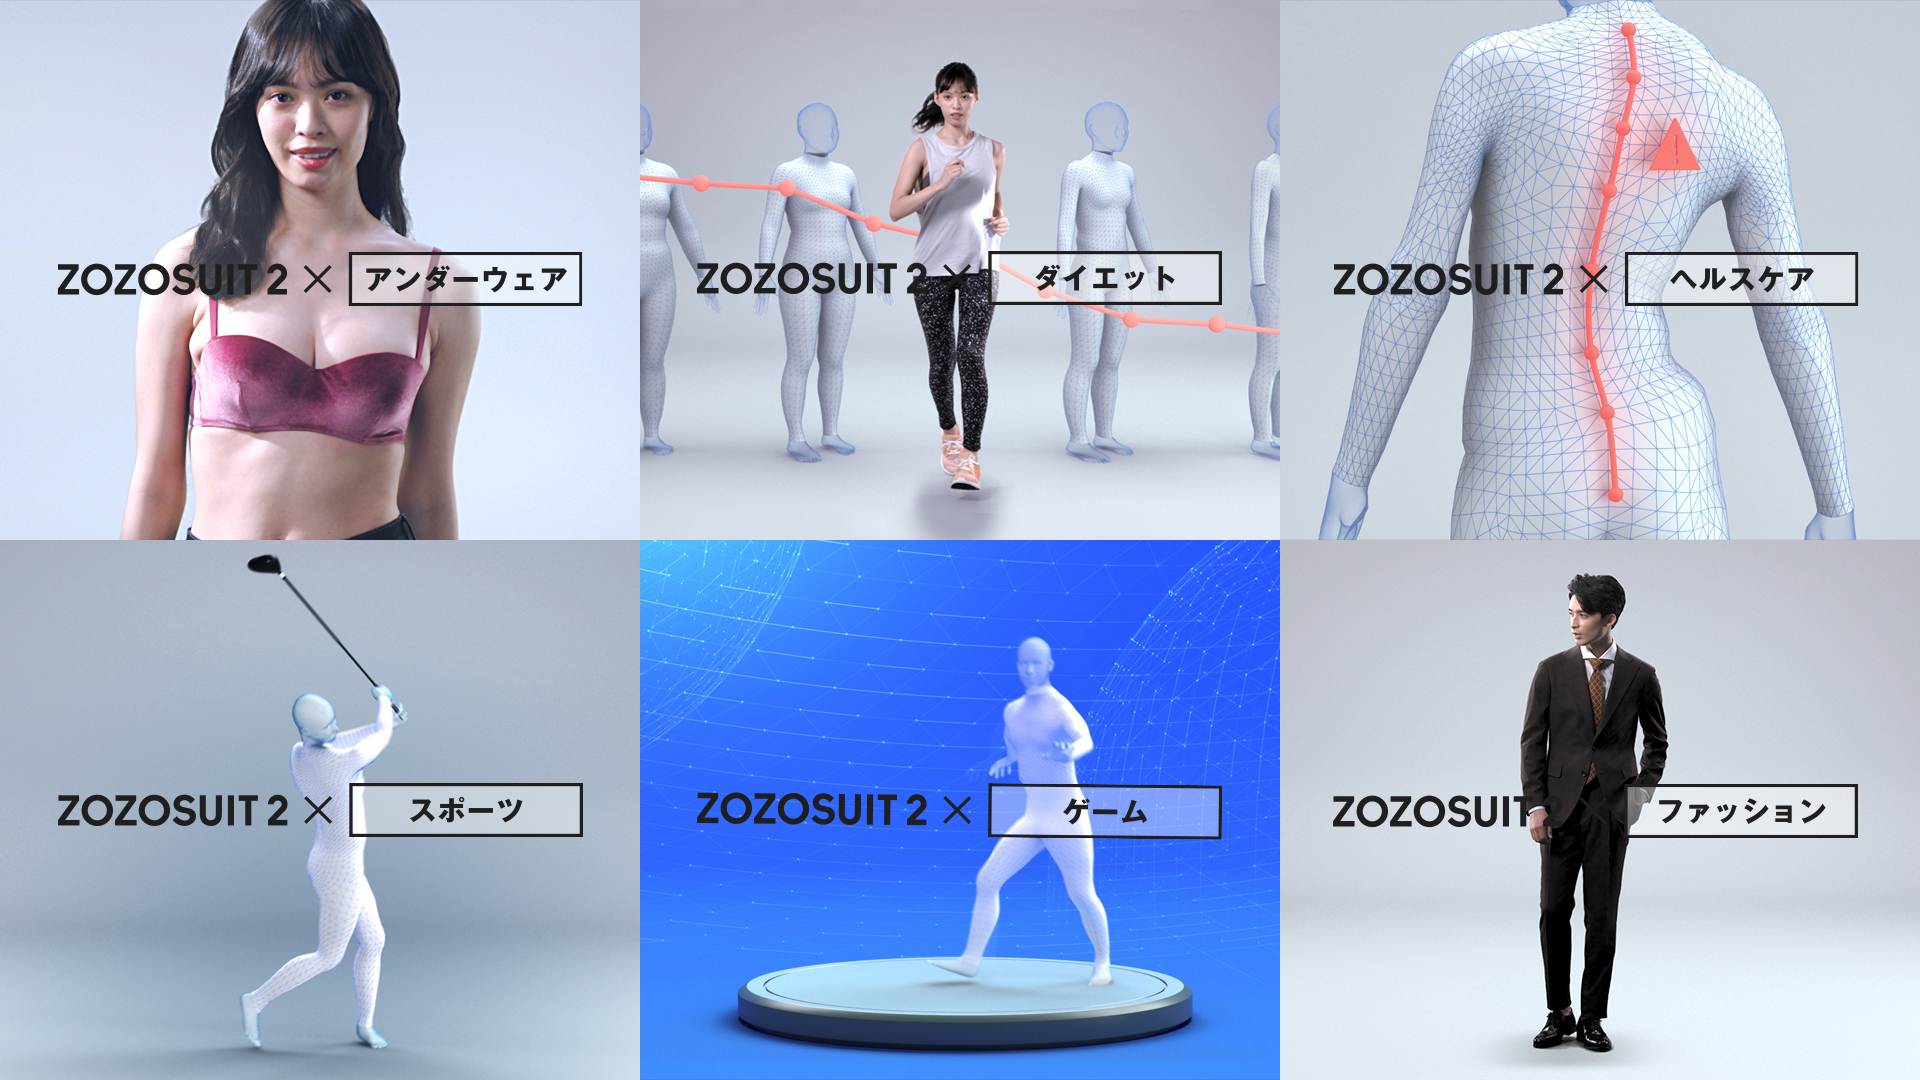 ZOZO launches ZOZOSUIT 2, a 3D body measurement suit, and opens